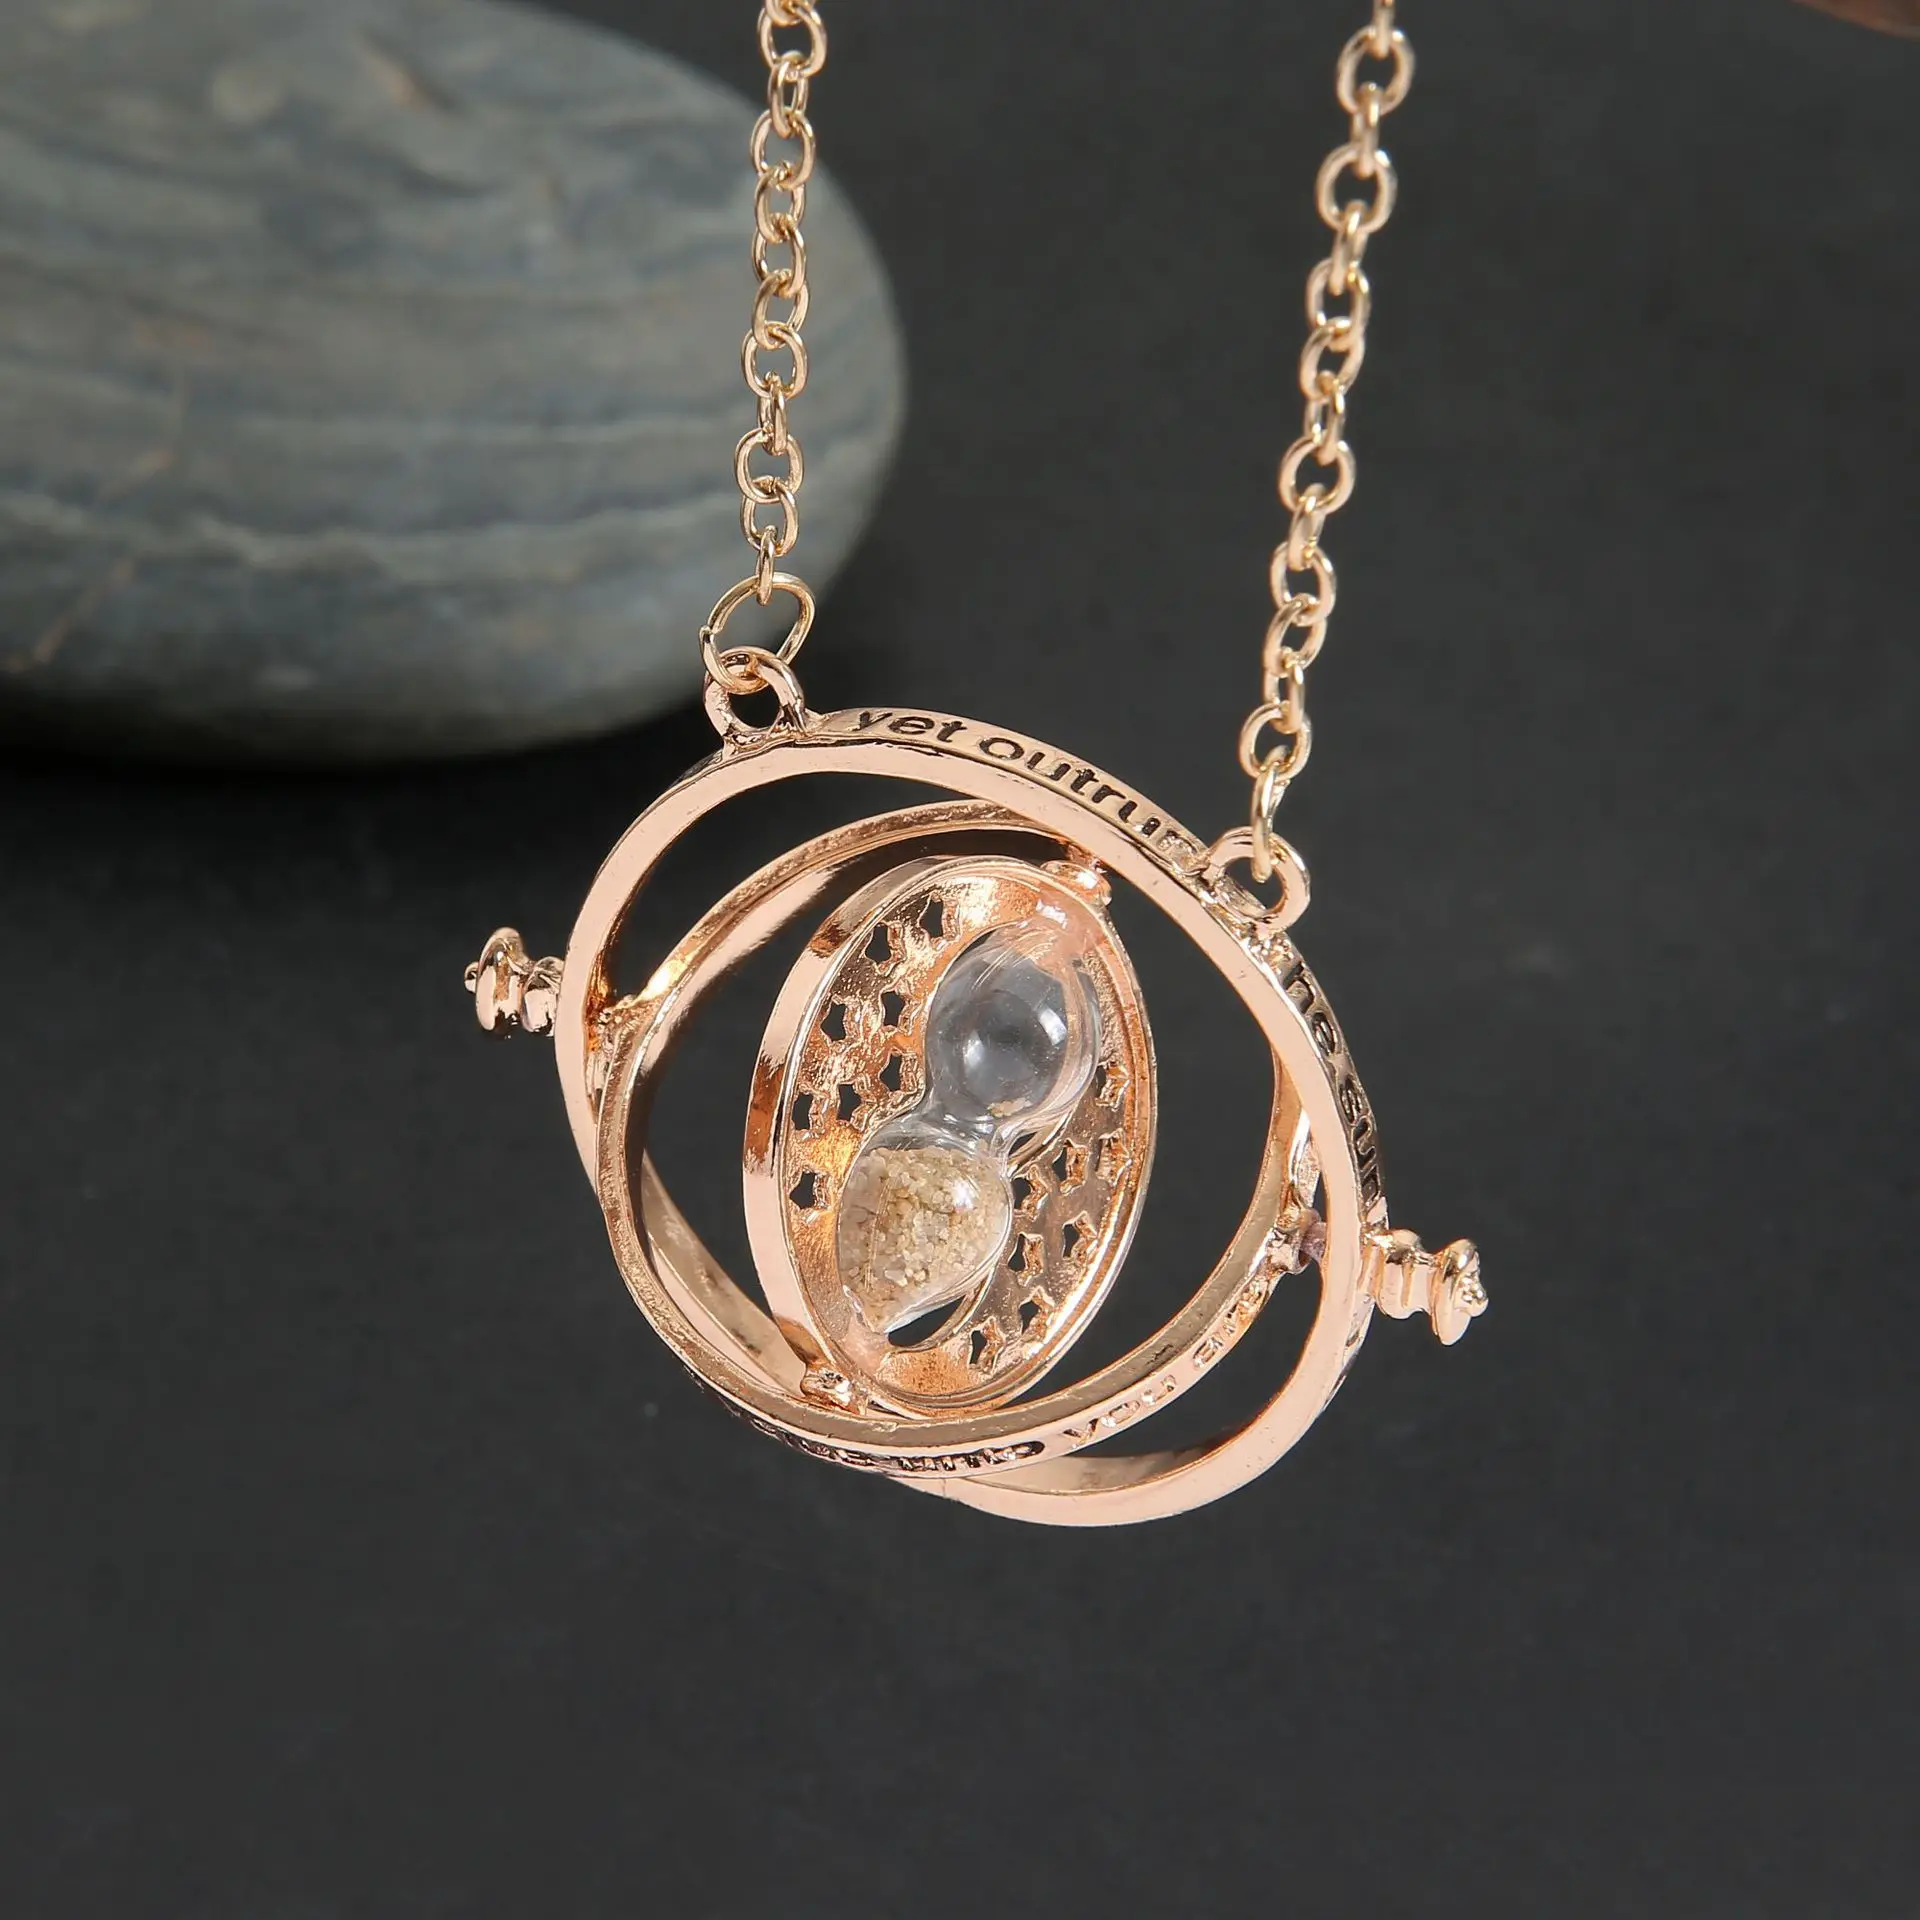 New Harries Potters Time Converter Necklace Wand Time Turner Hourglass Snitch Pendant Triangle Necklace Friend’s Birthday Gift